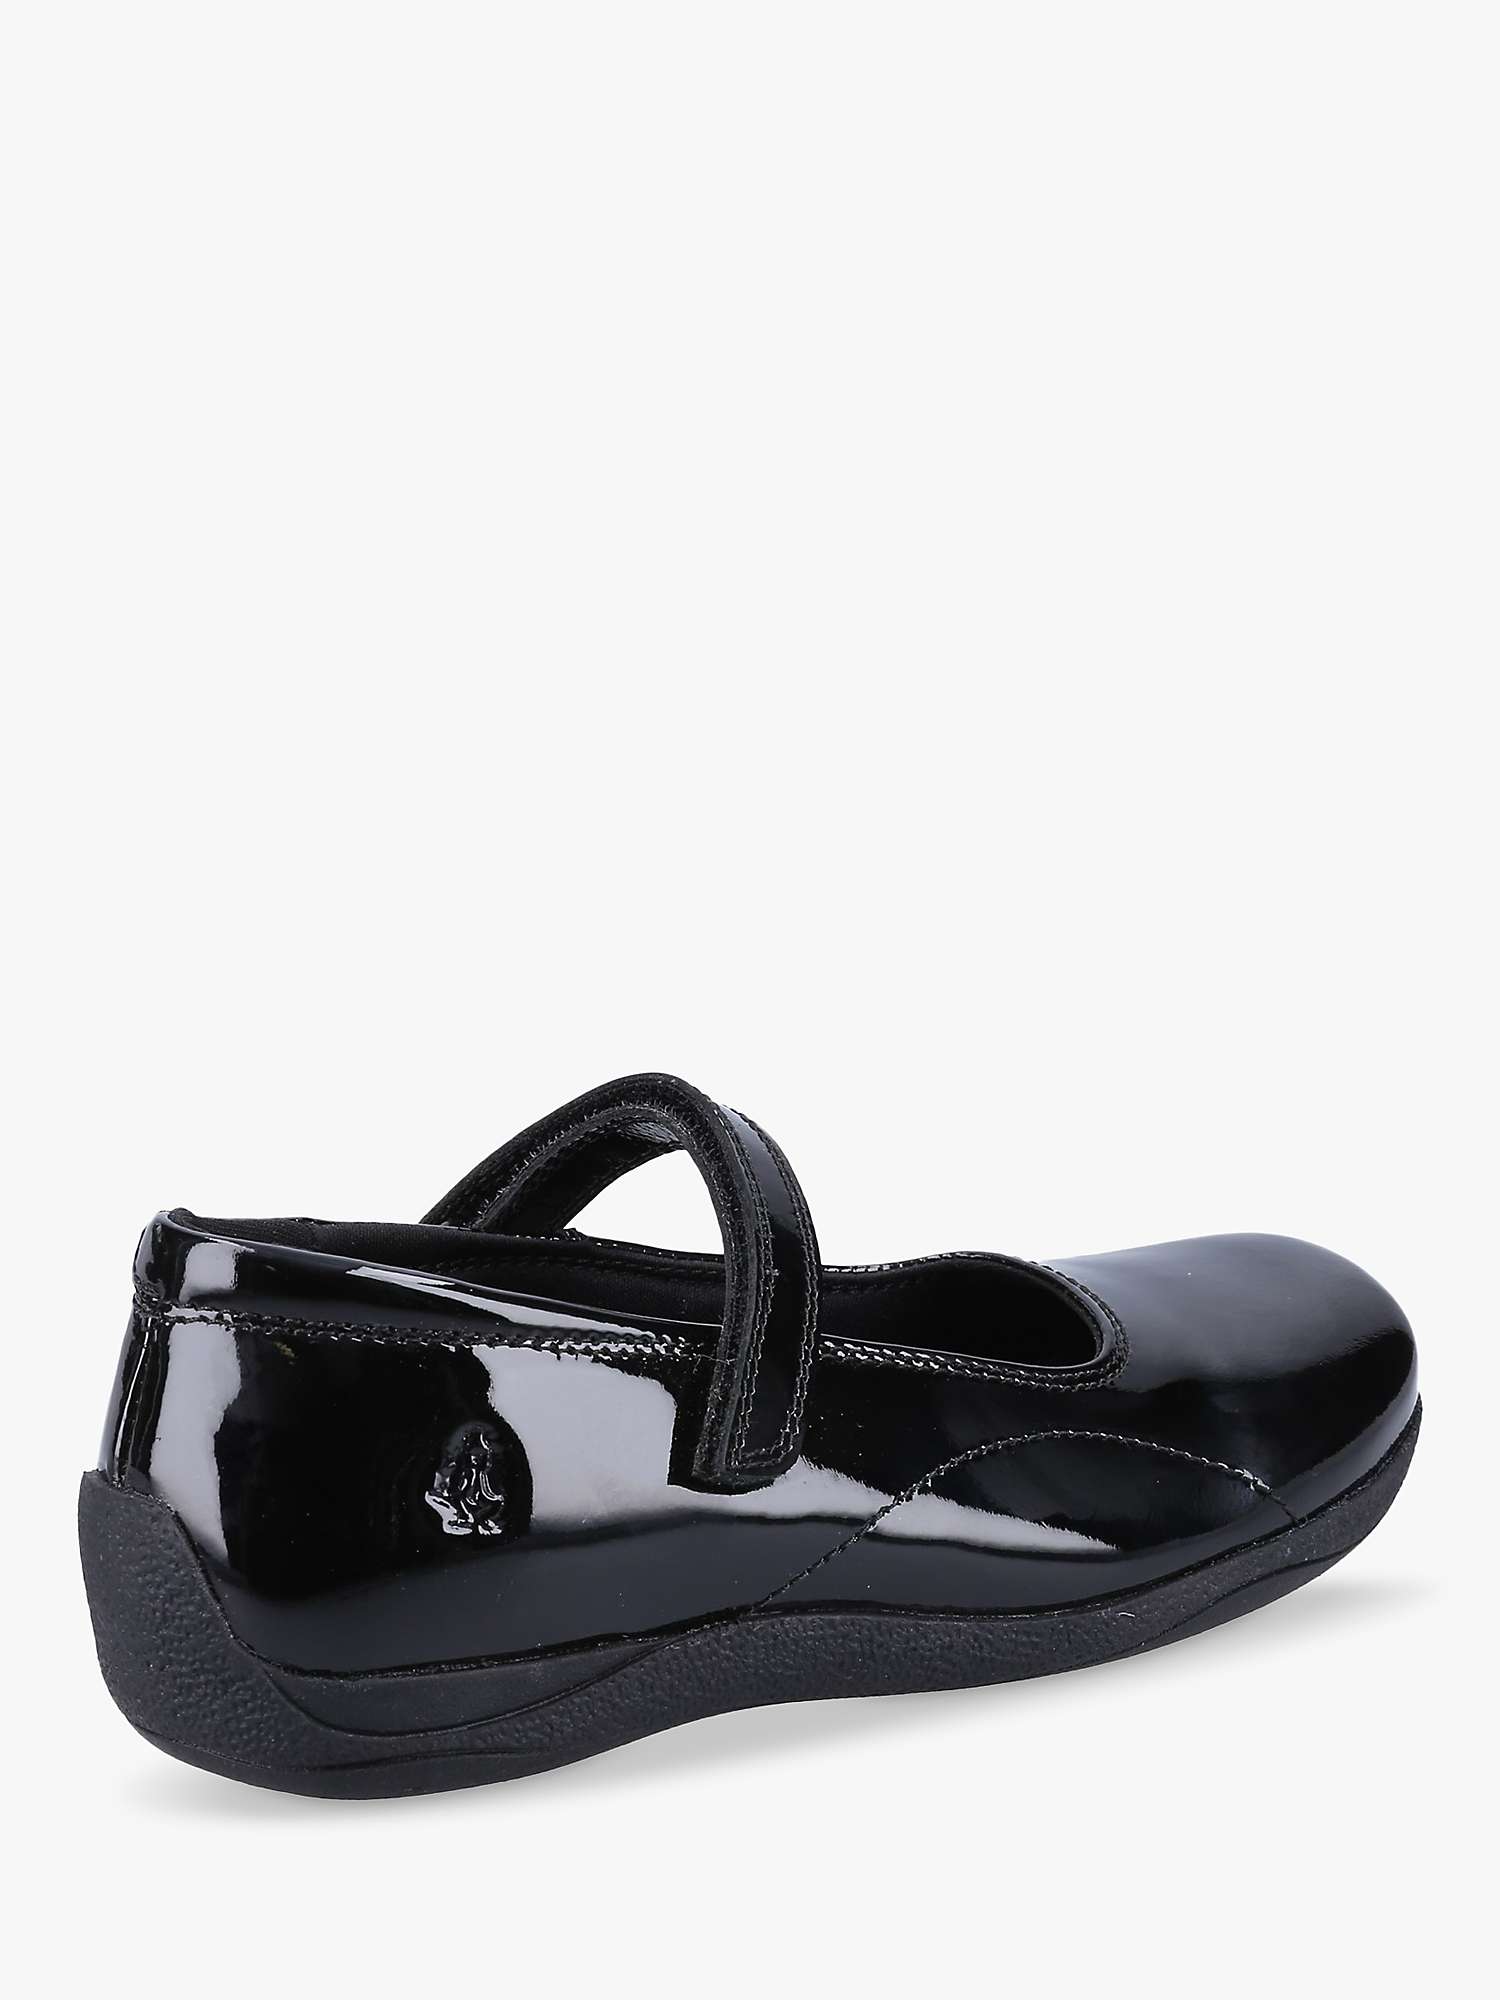 Buy Hush Puppies Aria Patent School Shoes Online at johnlewis.com